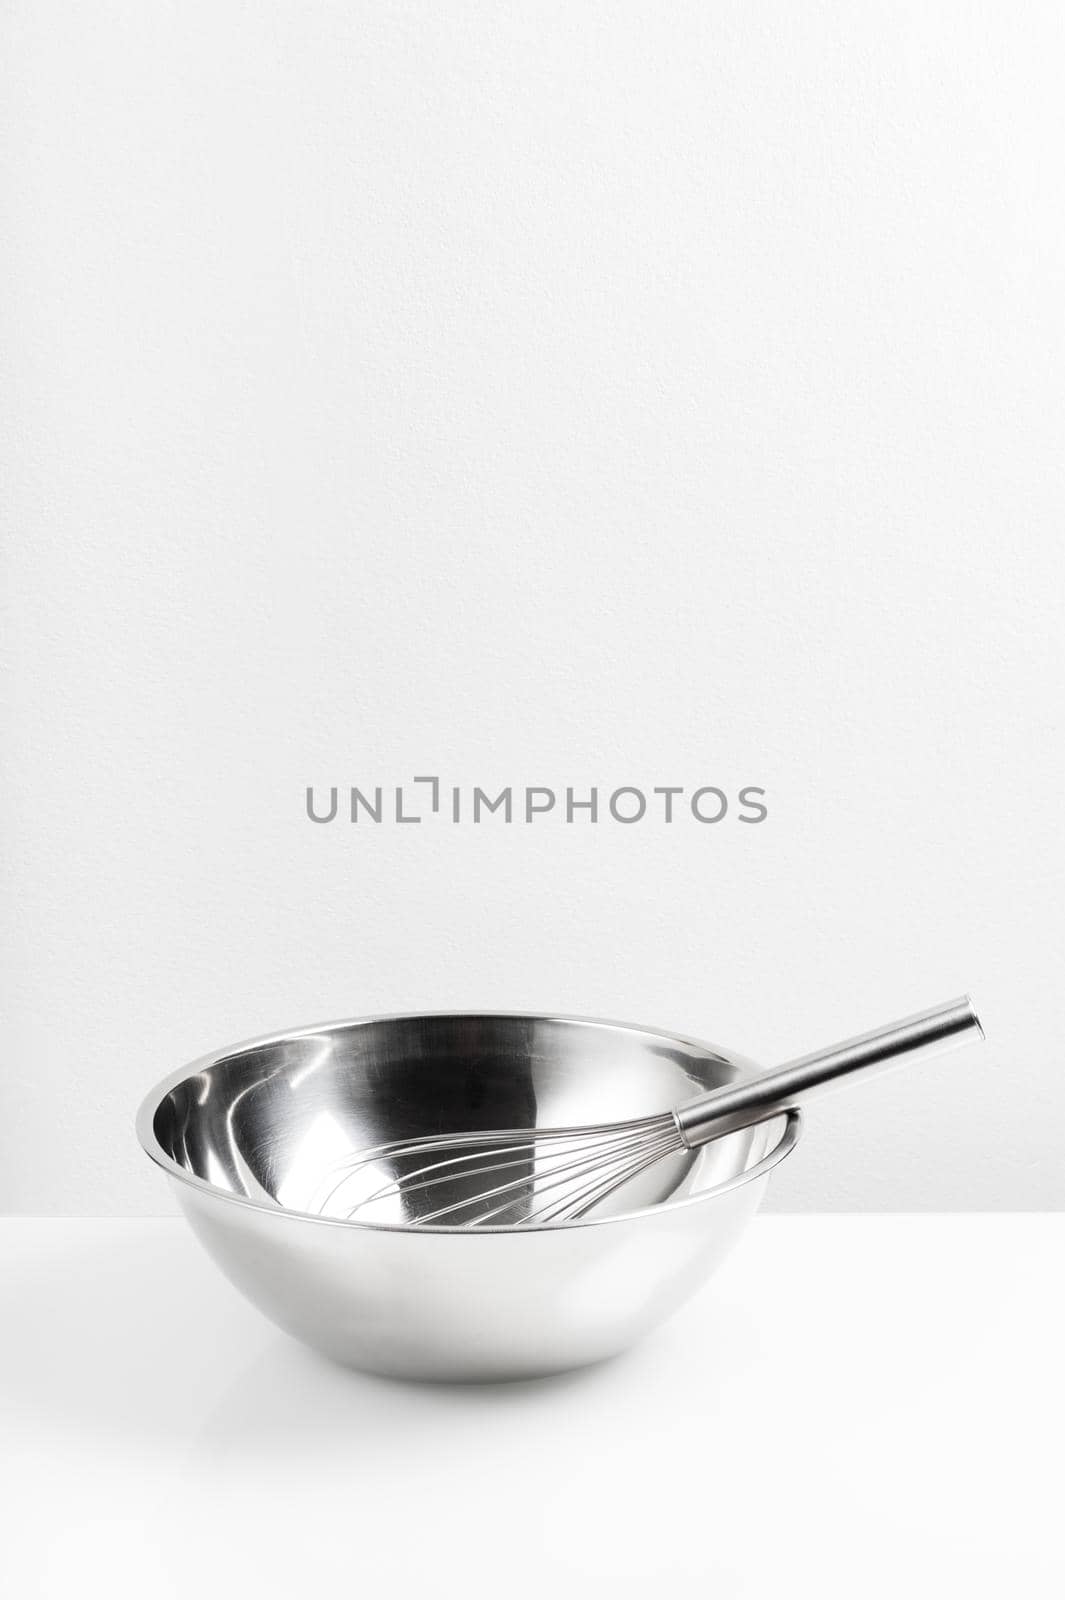 Whisk over white background by norgal